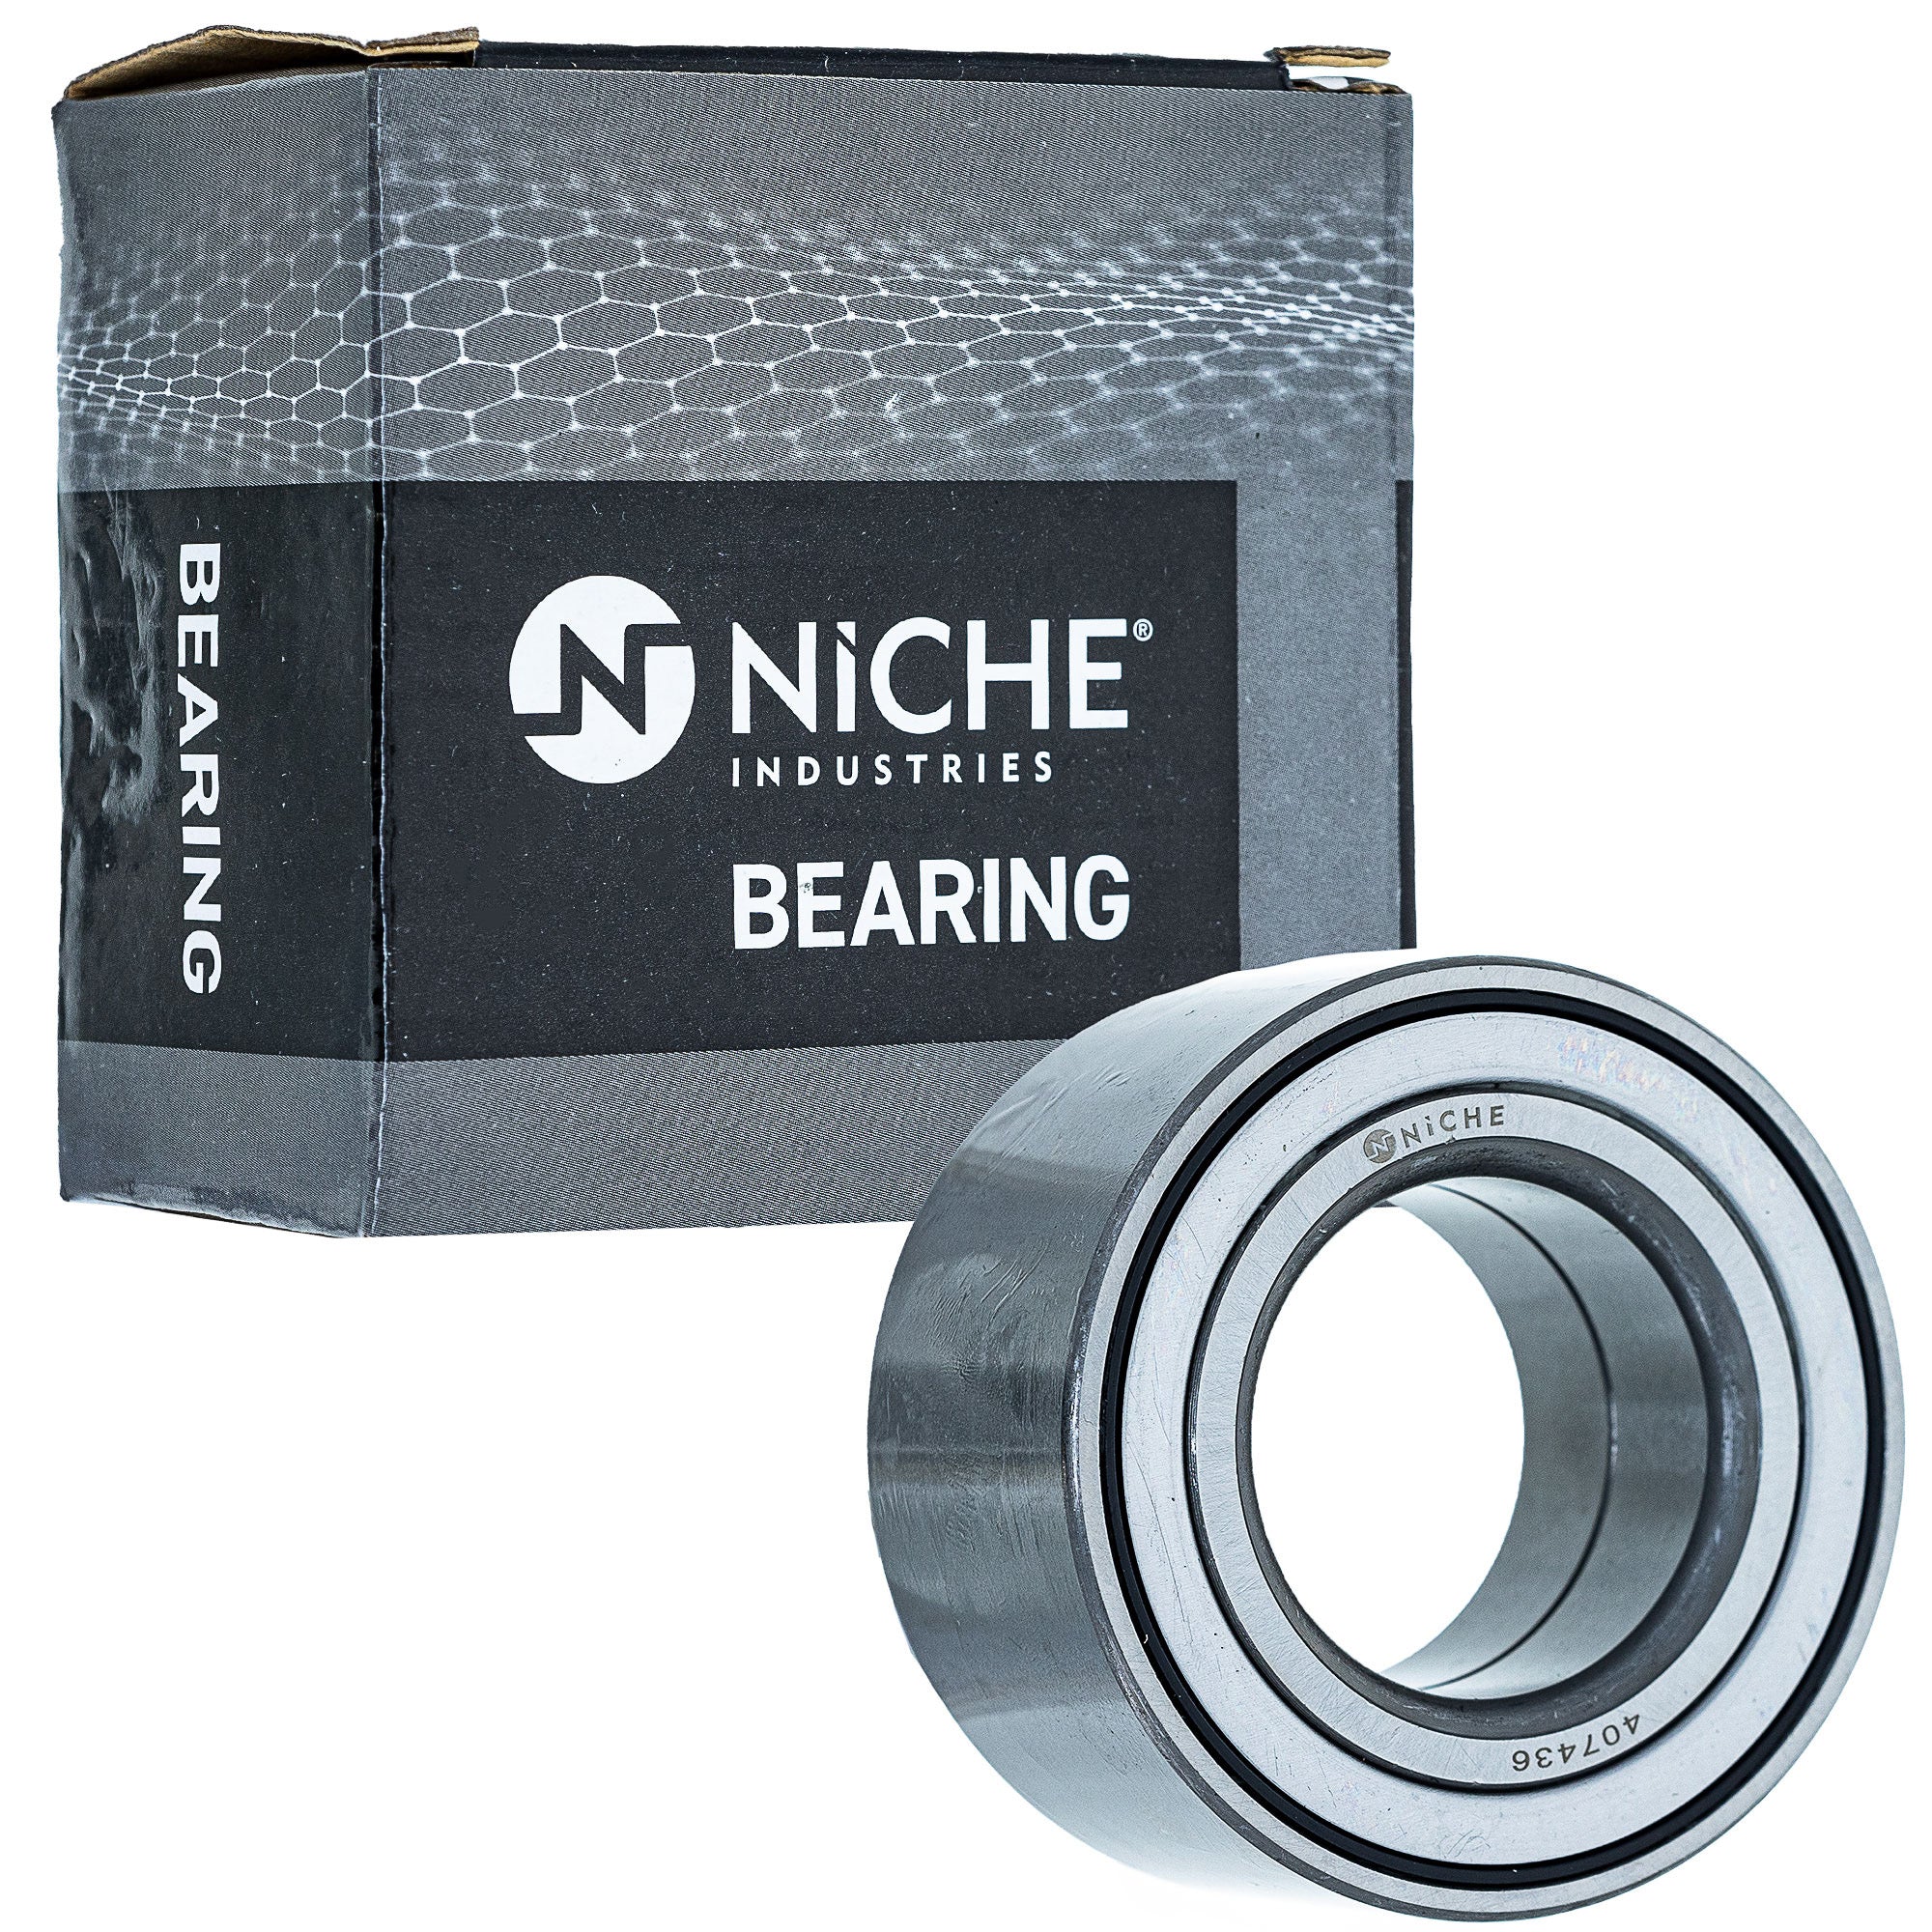 NICHE 519-CBB2291R Bearing 2-Pack for zOTHER